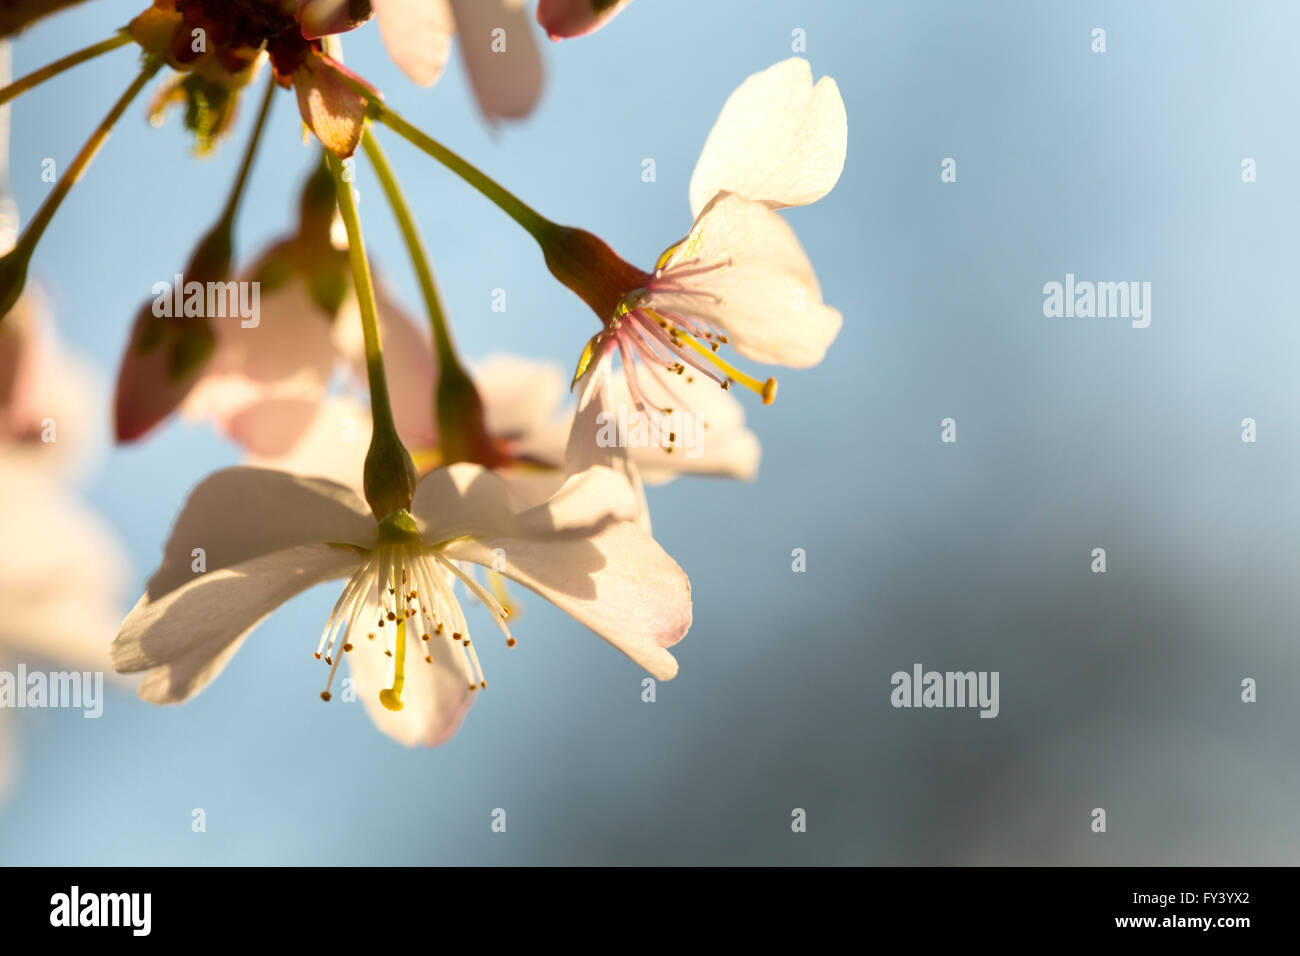 Delicate Spring Blossom. Spring blossom back lit by the setting sun shows up glowing in all it delicate nature. Stock Photo